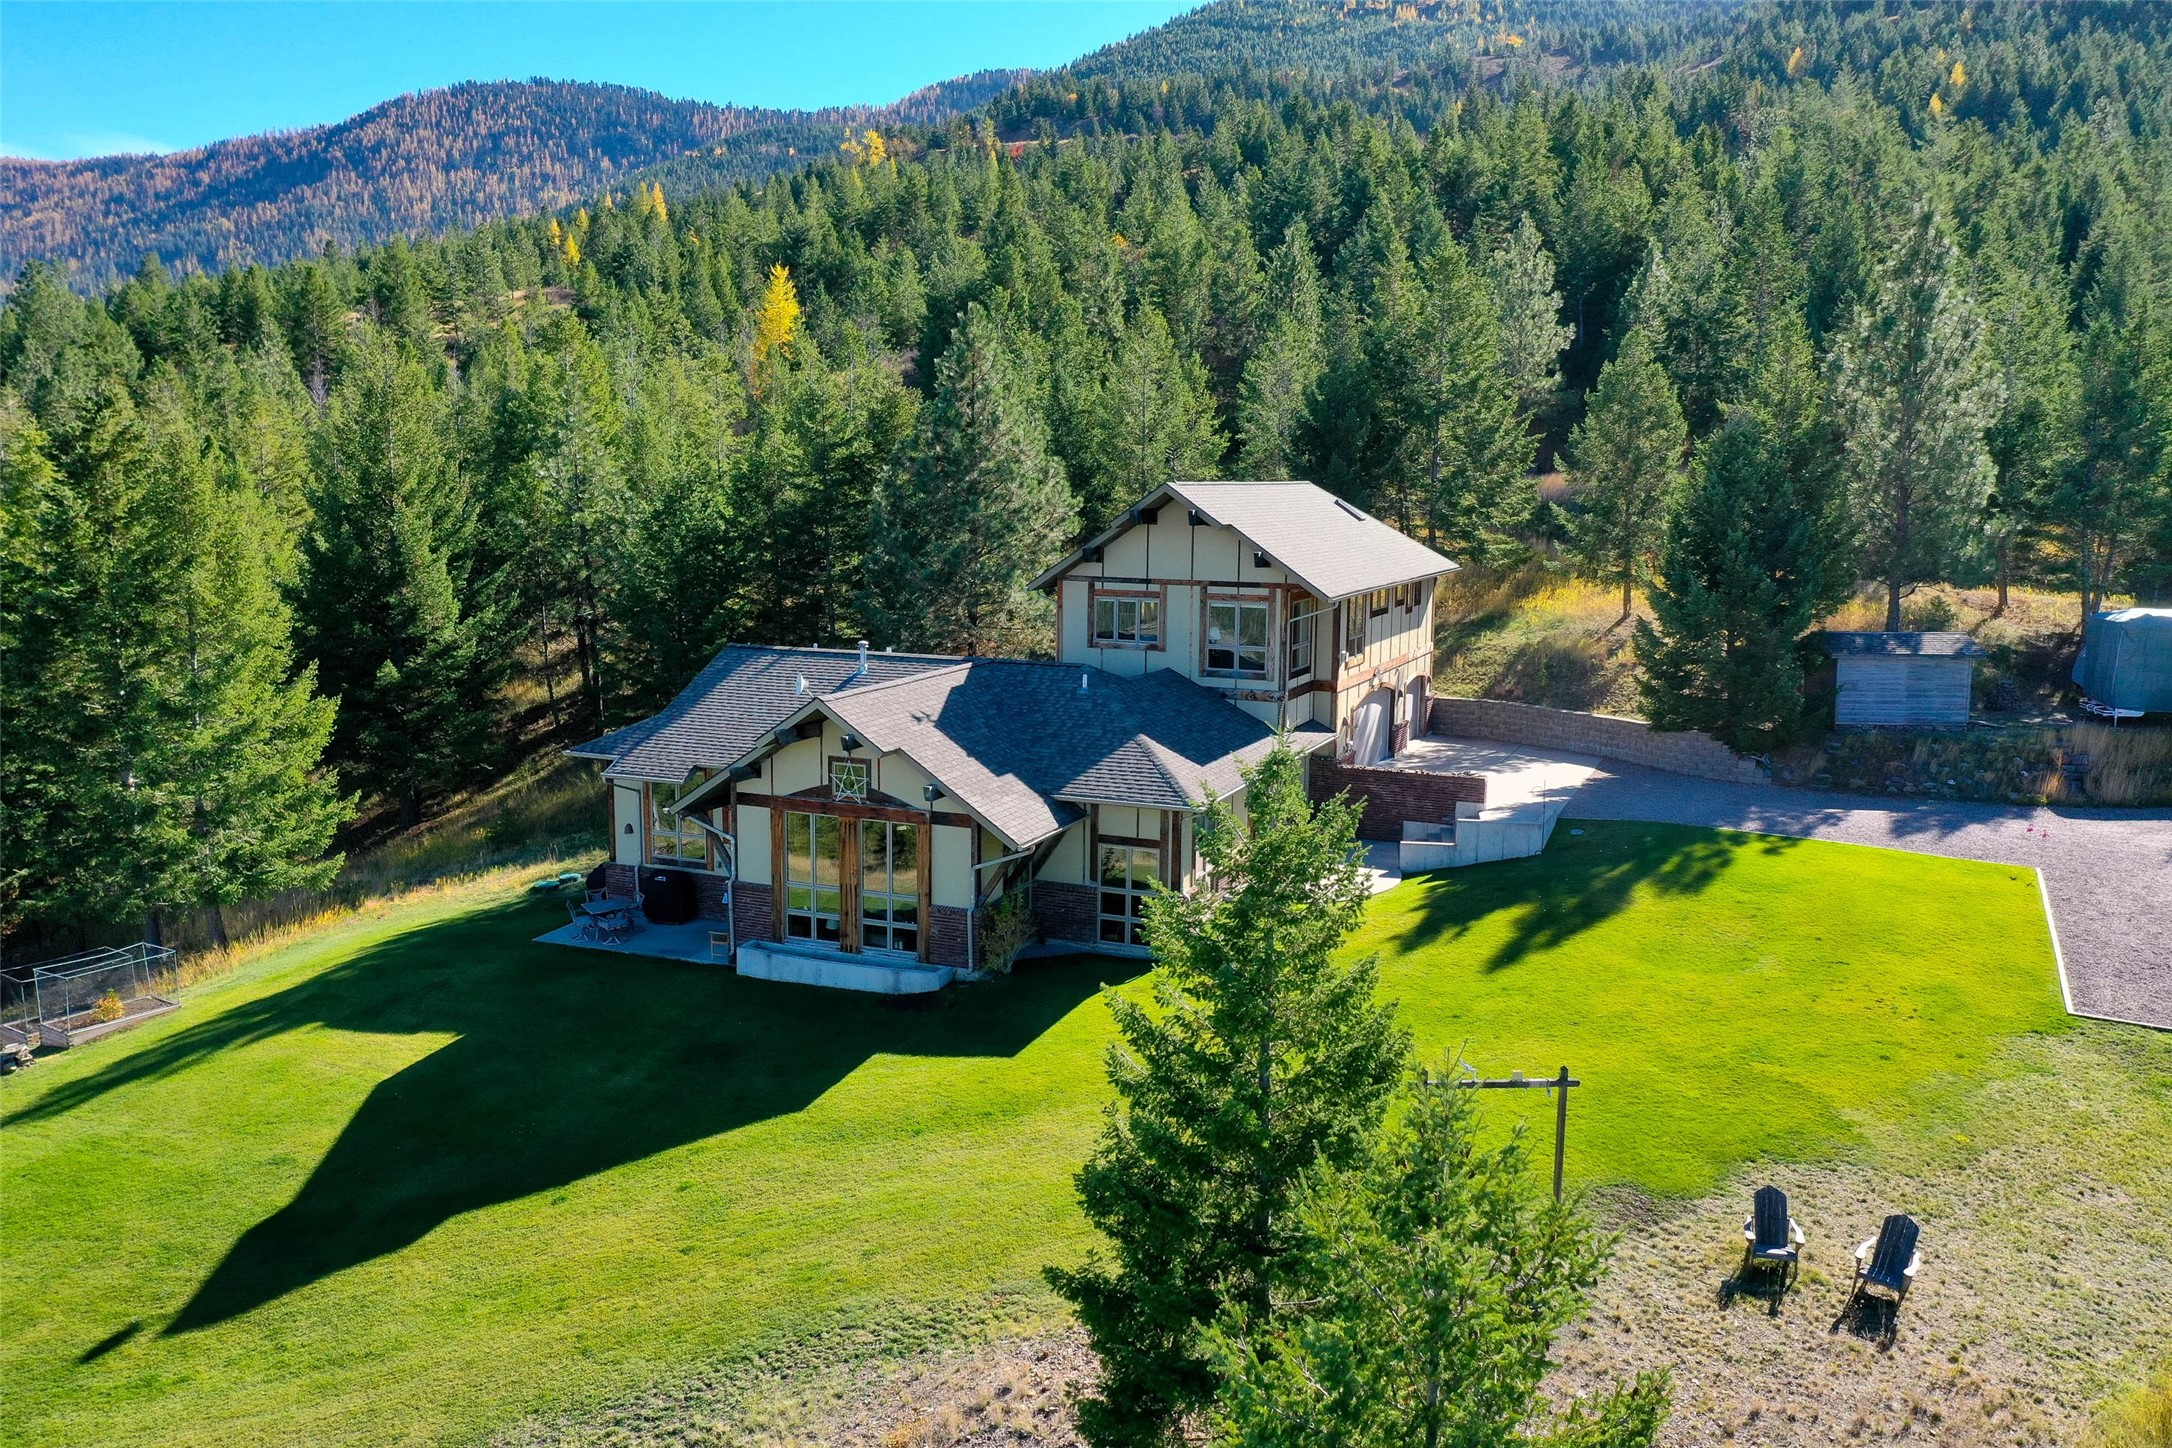 OPEN HOUSE SUNDAY APRIL 7th 12:00-2:00pm.  Come see then!  Pattee Canyon mountain retreat on nearly 6 acres, only 10 minutes from Higgins Ave. Near end of the road privacy with amazing views of the Missoula Valley and Pattee Canyon. This property adjoins Missoula Open Space lands with access onto the popular Barmeyer trail. The original home was built by Scott Ayers in 2003 and Buckley Builders completed the second-floor addition and added garage in 2007. Enjoy the open main floor living with sunken living room and den. Nearly 20 feet tall ceilings with plenty of windows to view from and let the light in.  Lots of built-in storage and closets plus a big three car garage. Perched on the upper level is the primary bedroom suite offering an area you will want to hang out in to read or just take in the views. Modern bath with big walk-in shower and closet. Don't miss the small den and storage room too. The home is comfortably heated by in floor radiant heat.